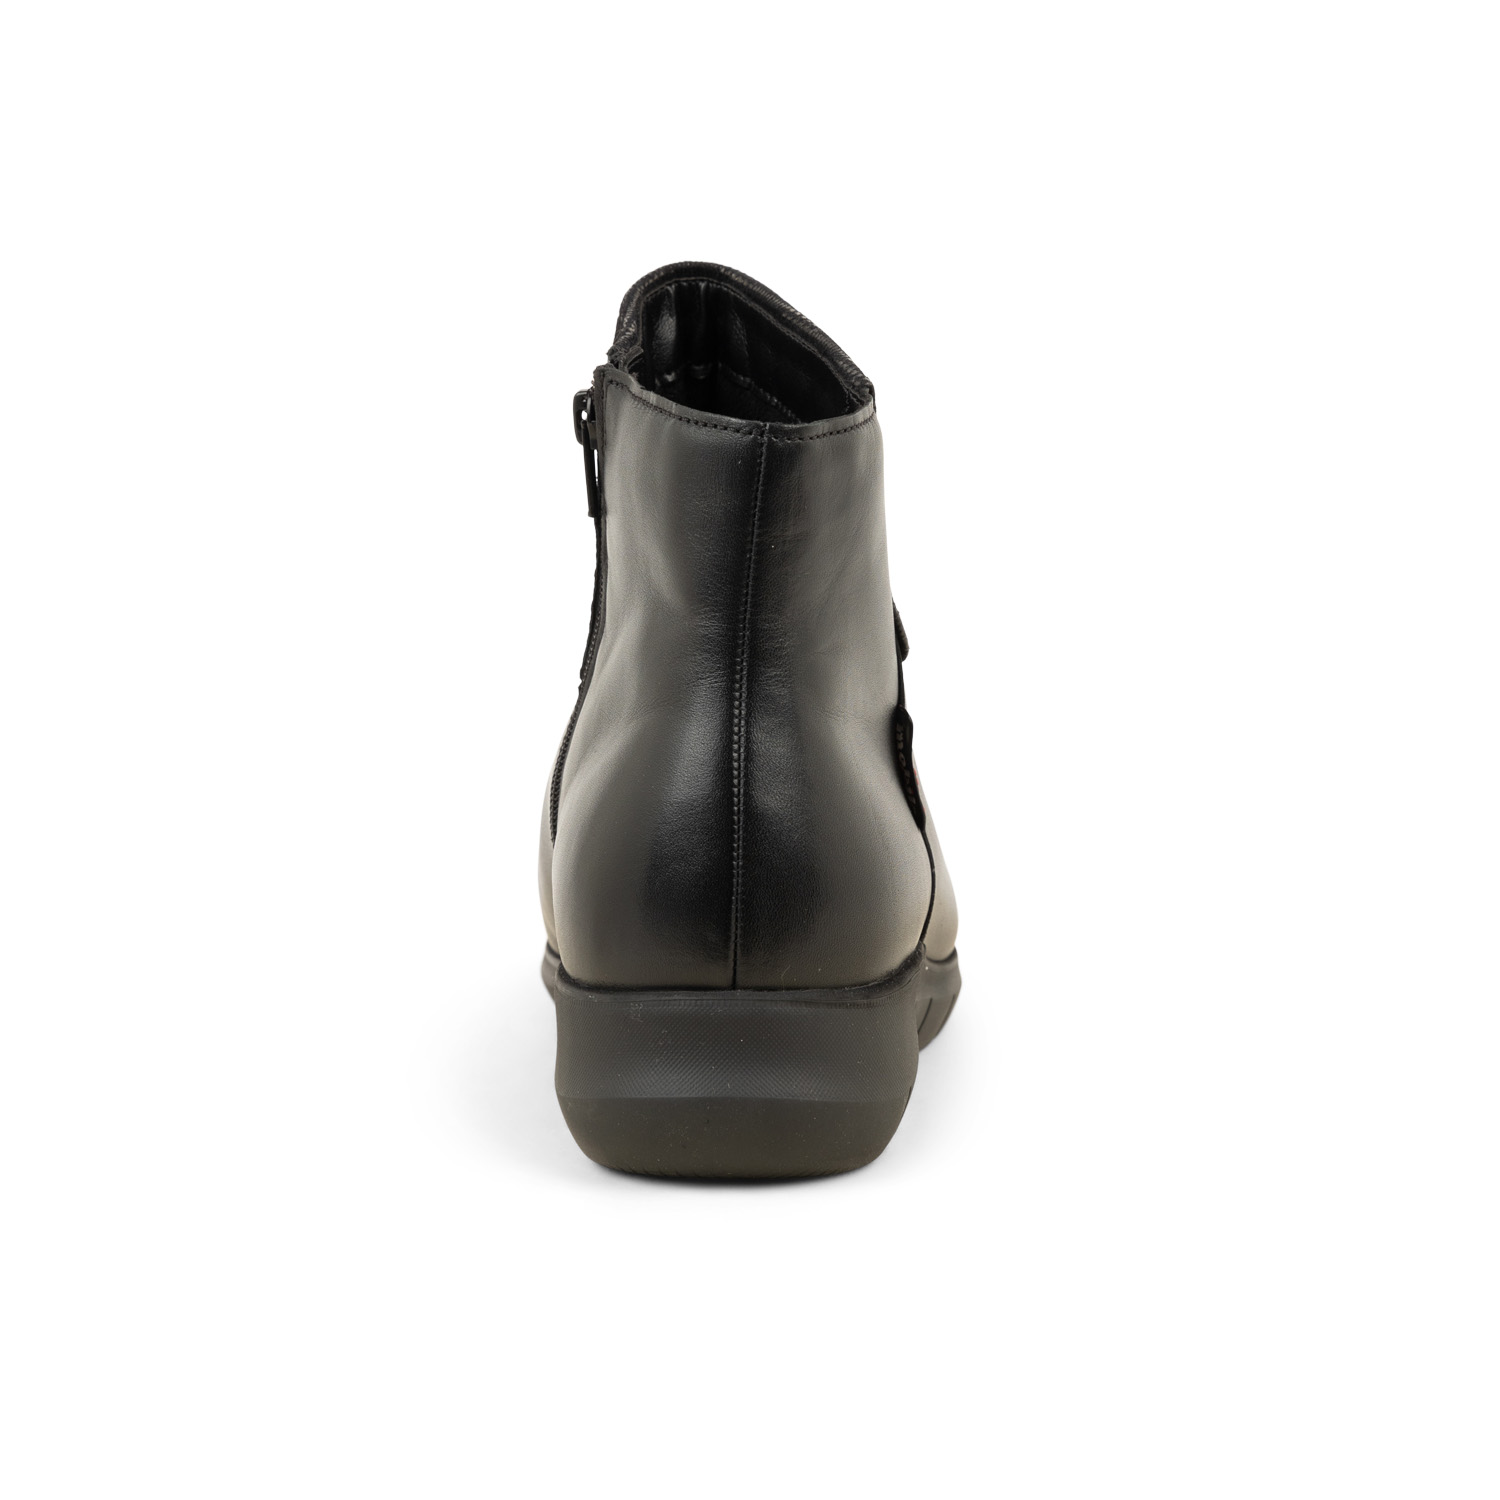 03 - ILINCA - MOBILS BY MEPHISTO - Boots et bottines - Cuir